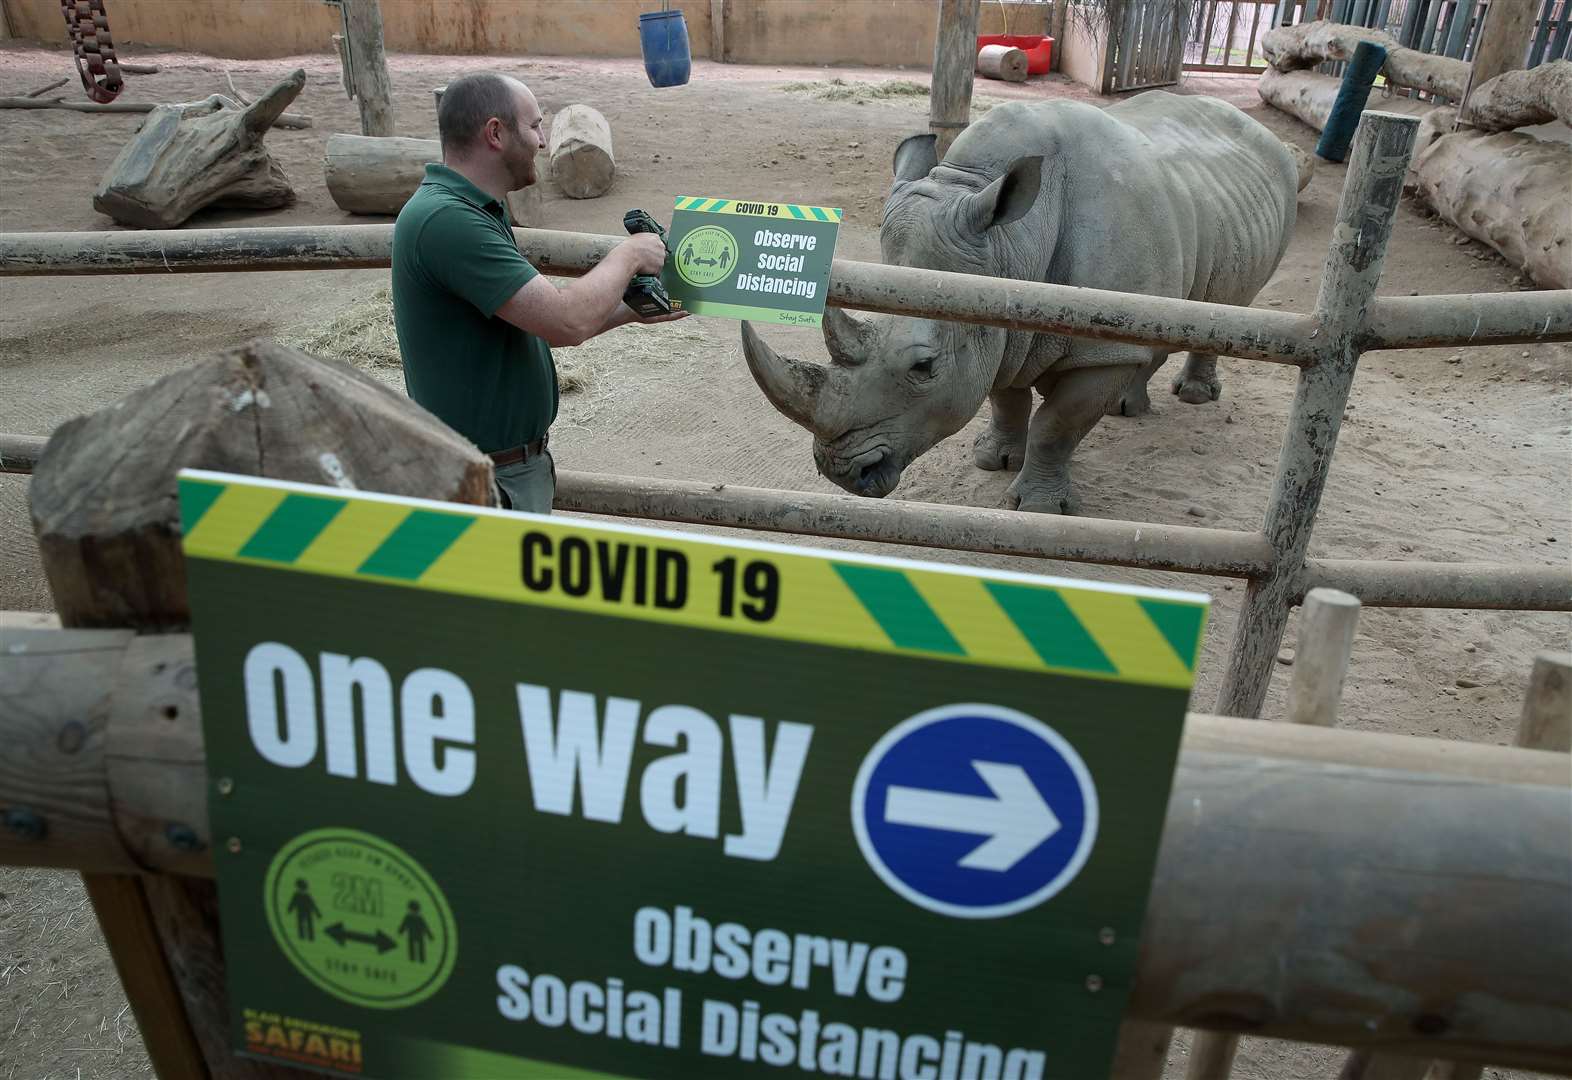 Operations supervisor Dave Warren installs signs in the rhino yard explaining social distancing measures (Andrew Milligan/PA)